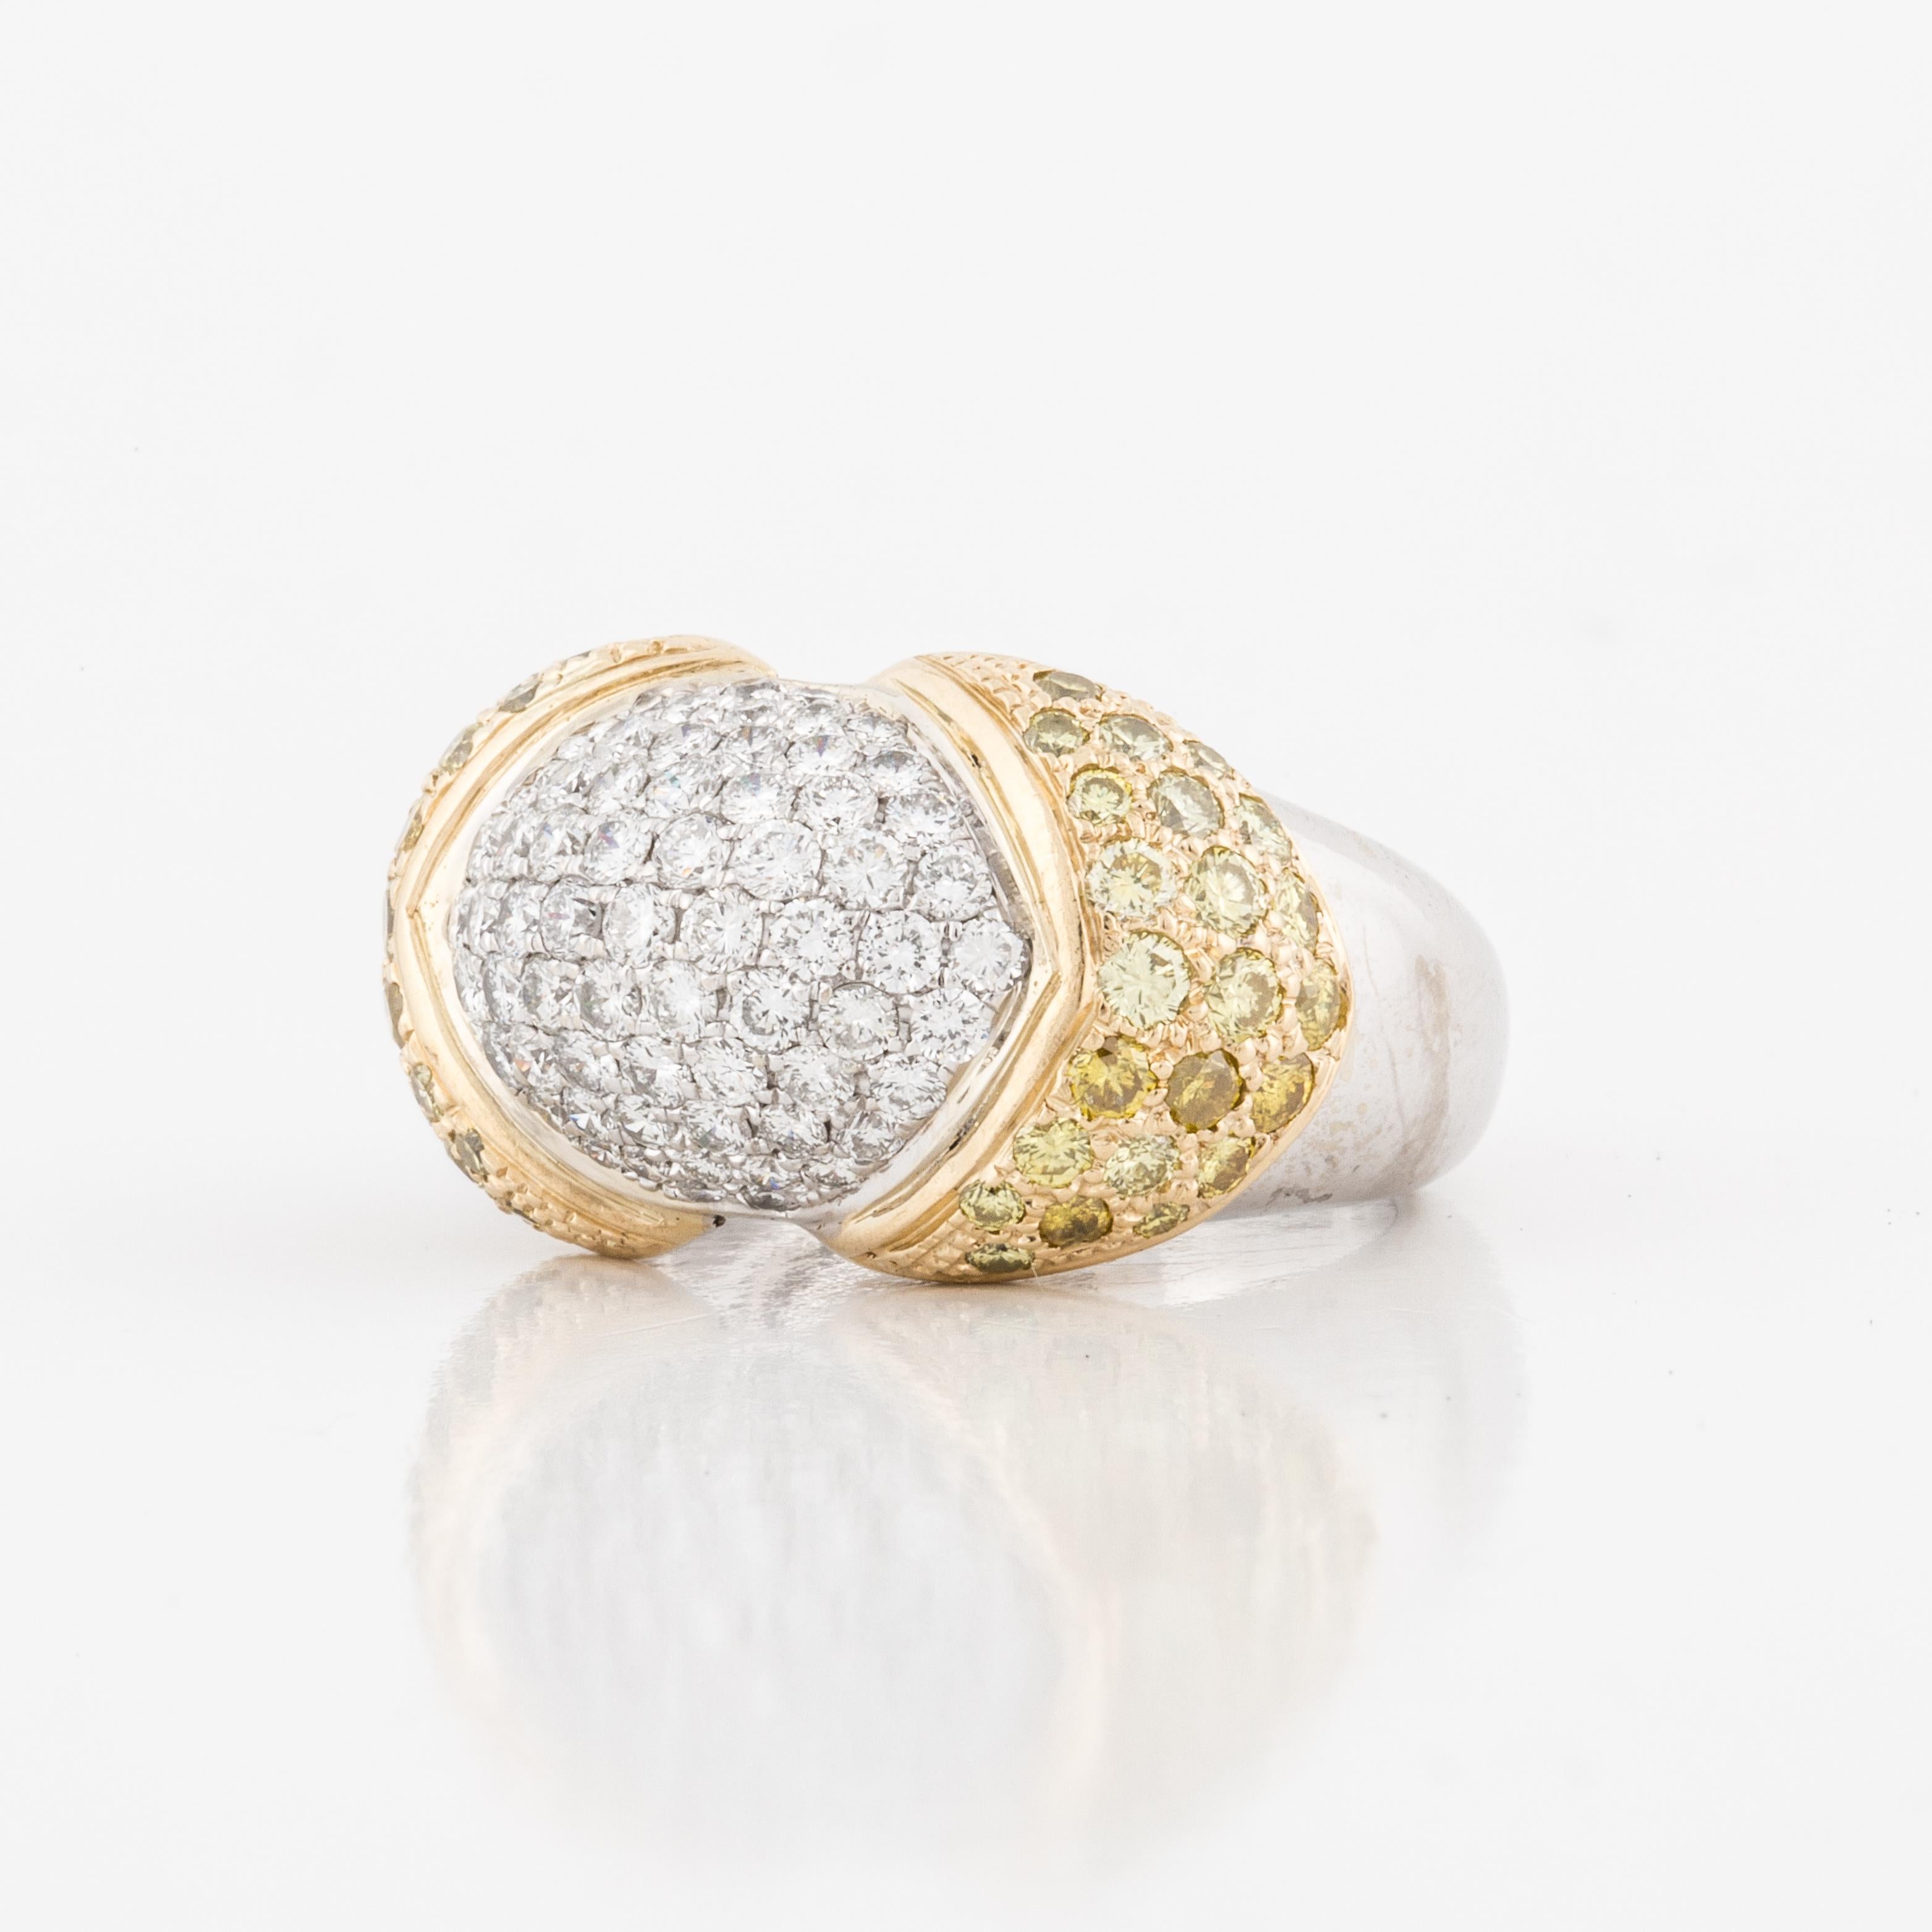 Pavé diamond domed ring in 18K yellow and white gold.  The center is a small dome with sixty-five round diamonds that total 1.20 carats; F-G color and VS clarity.  On the sides of the domed center there are forty-six round yellow diamonds; Fancy